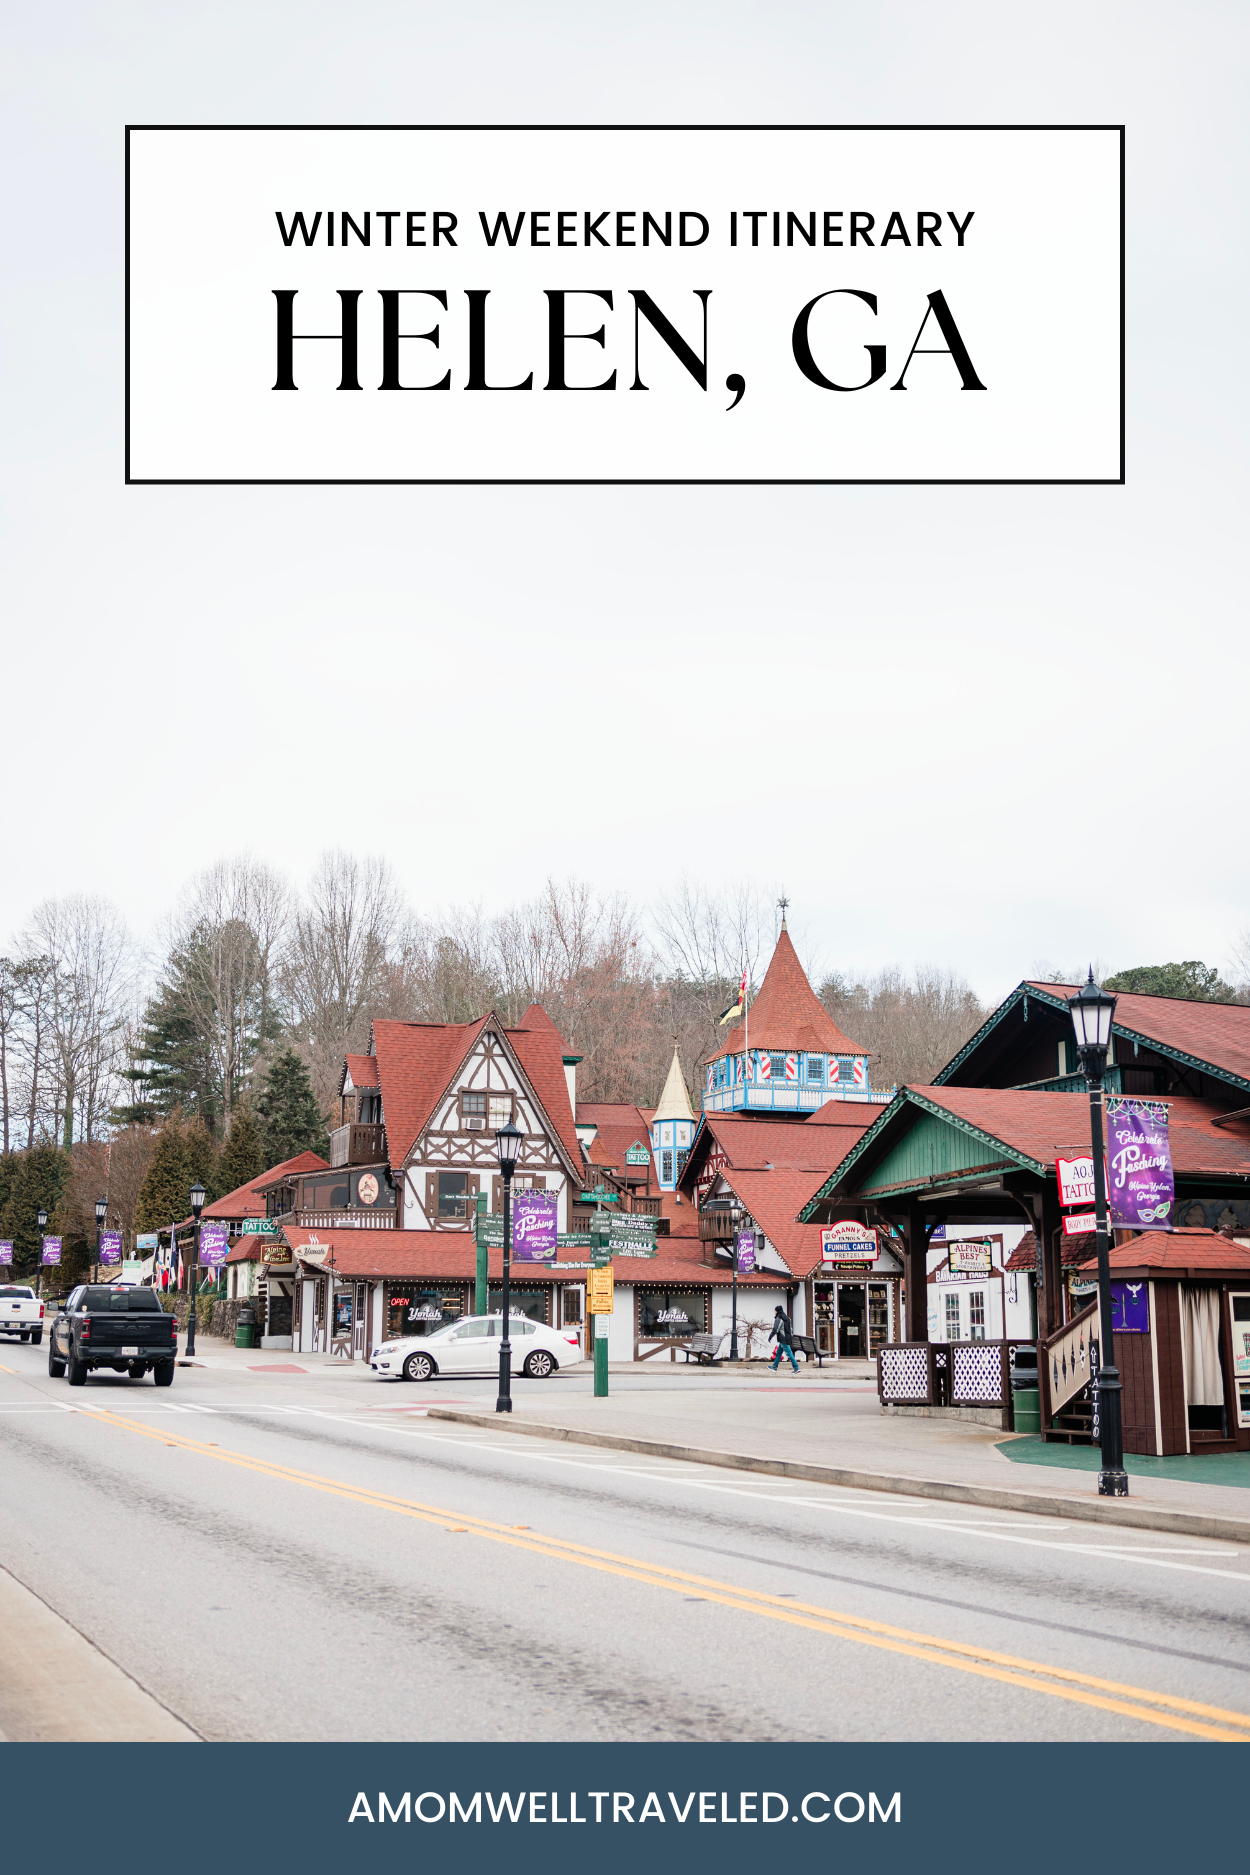 A winter weekend itinerary for families staying in Helen, Georgia, USA